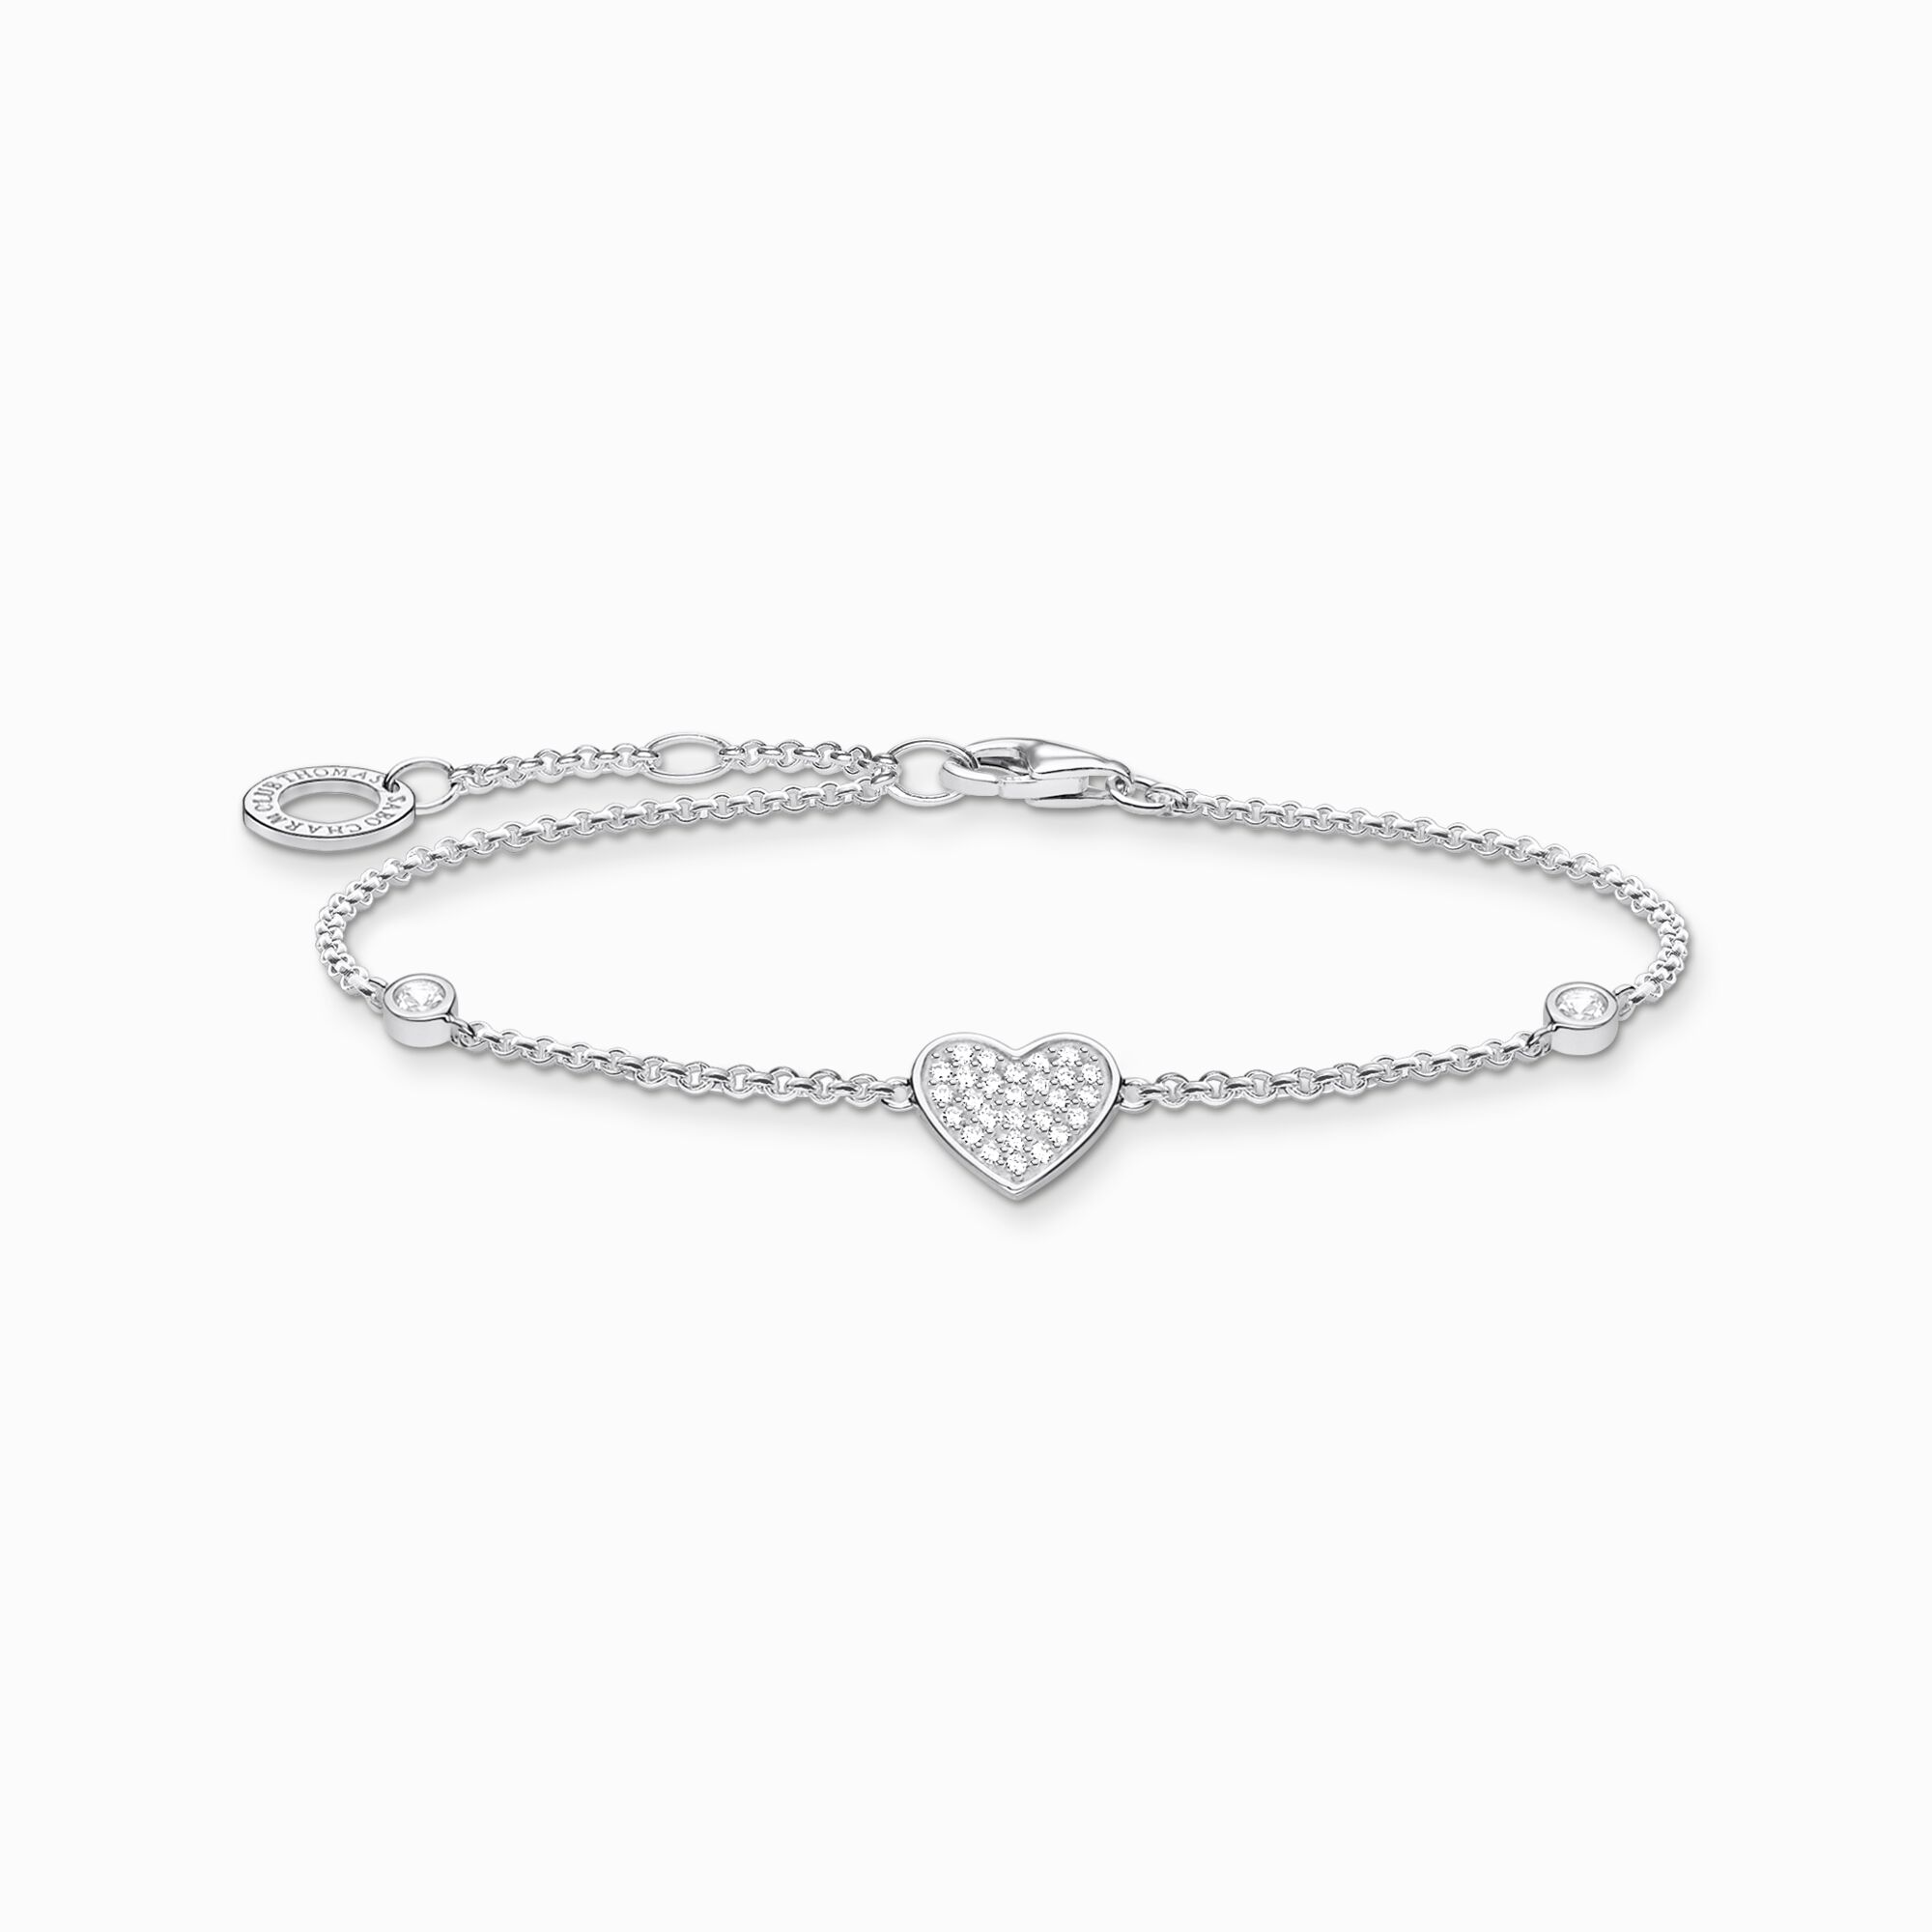 Bracelet heart with stones silver from the Charming Collection collection in the THOMAS SABO online store